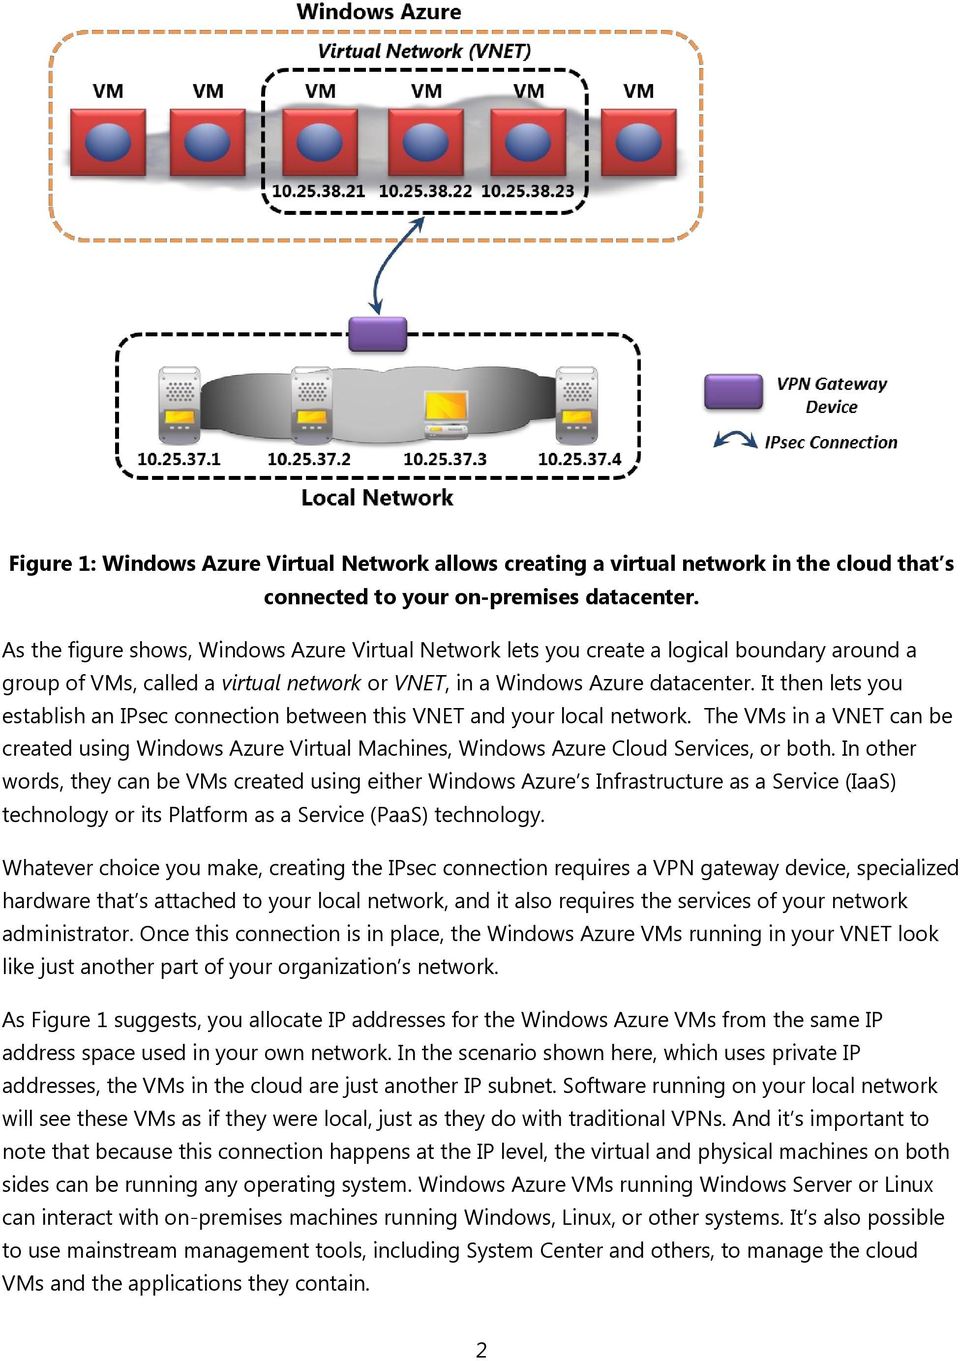 It then lets you establish an IPsec connection between this VNET and your local network. The VMs in a VNET can be created using Windows Azure Virtual Machines, Windows Azure Cloud Services, or both.